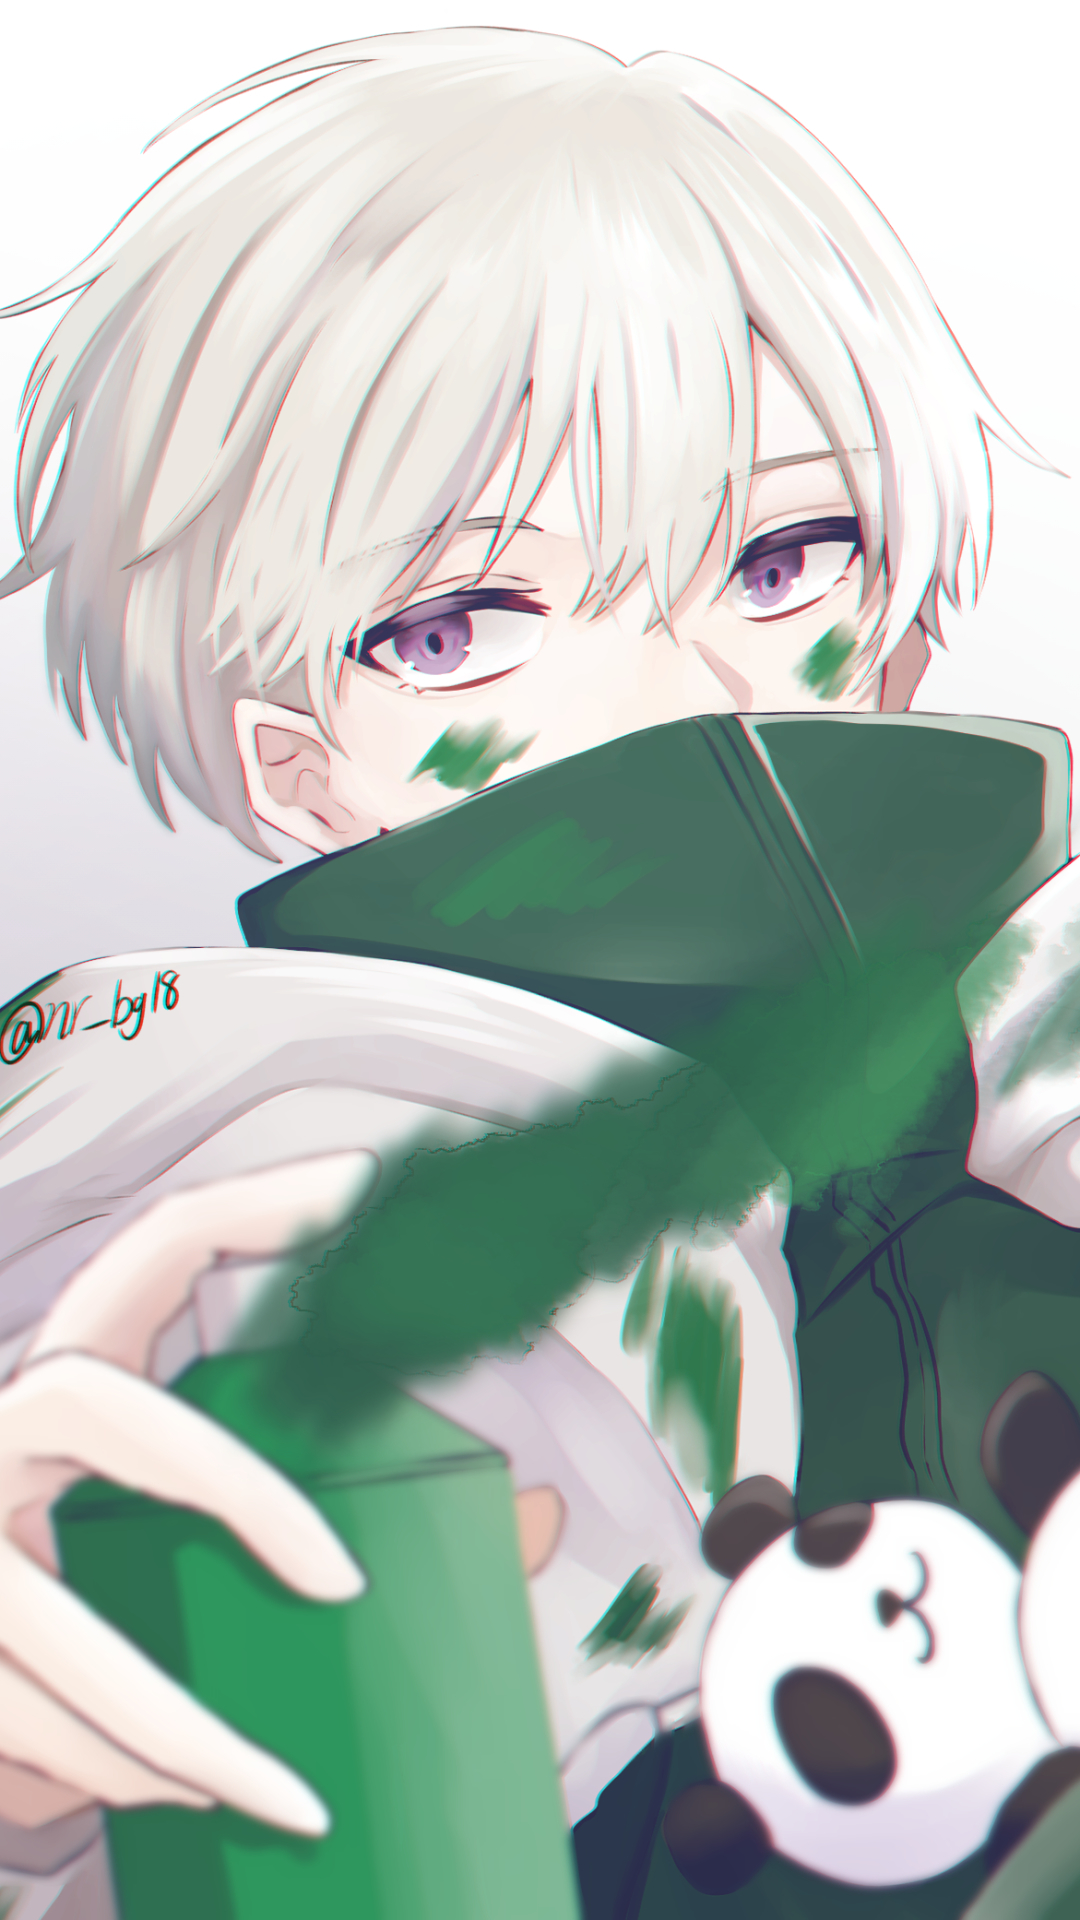 Free: Anime boy with white hair and green eyes